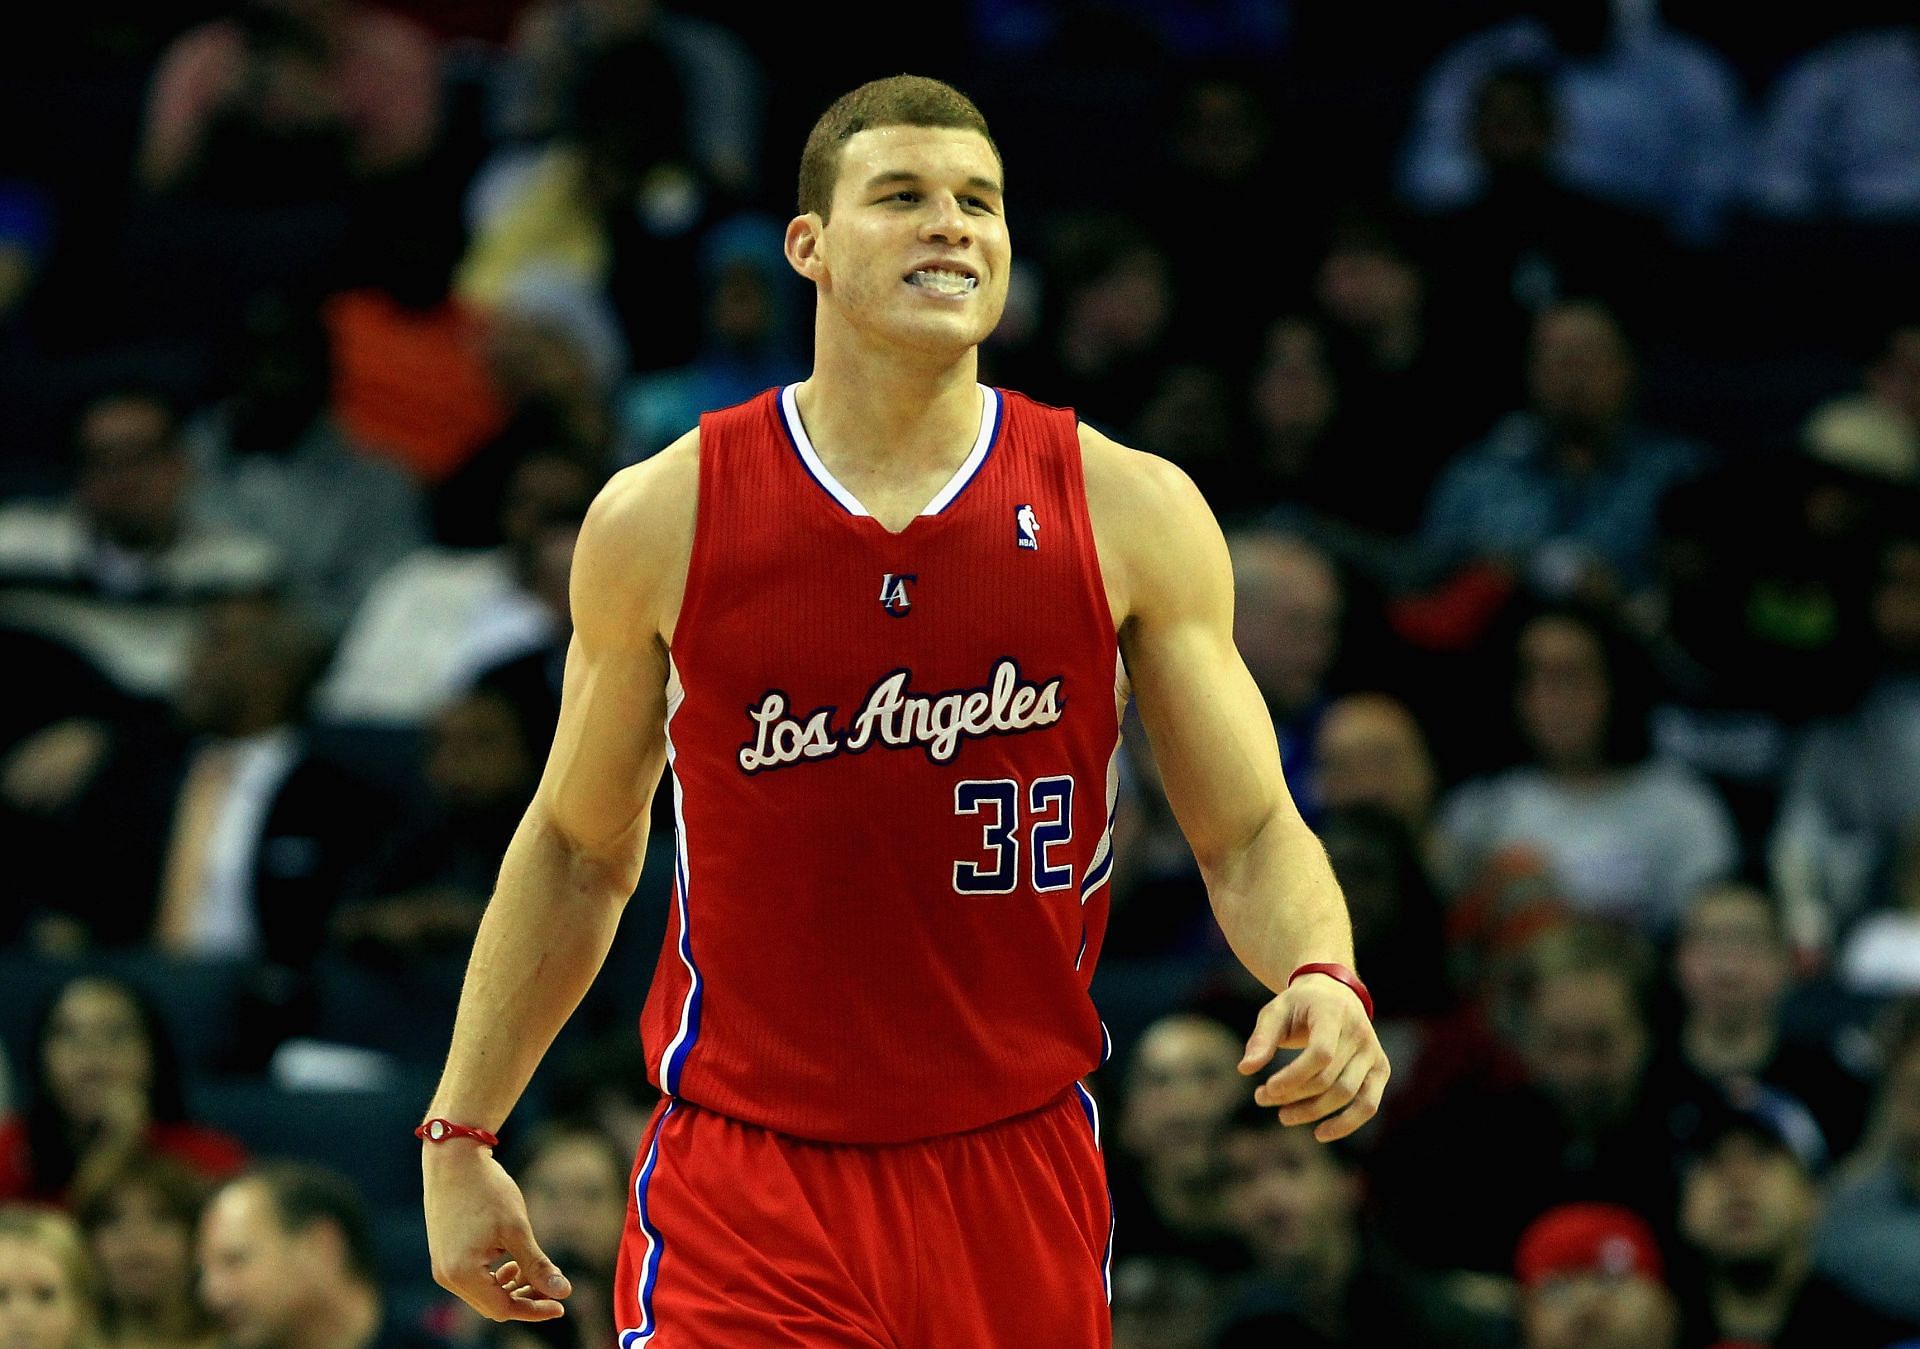 Blake Griffin of the LA Clippers